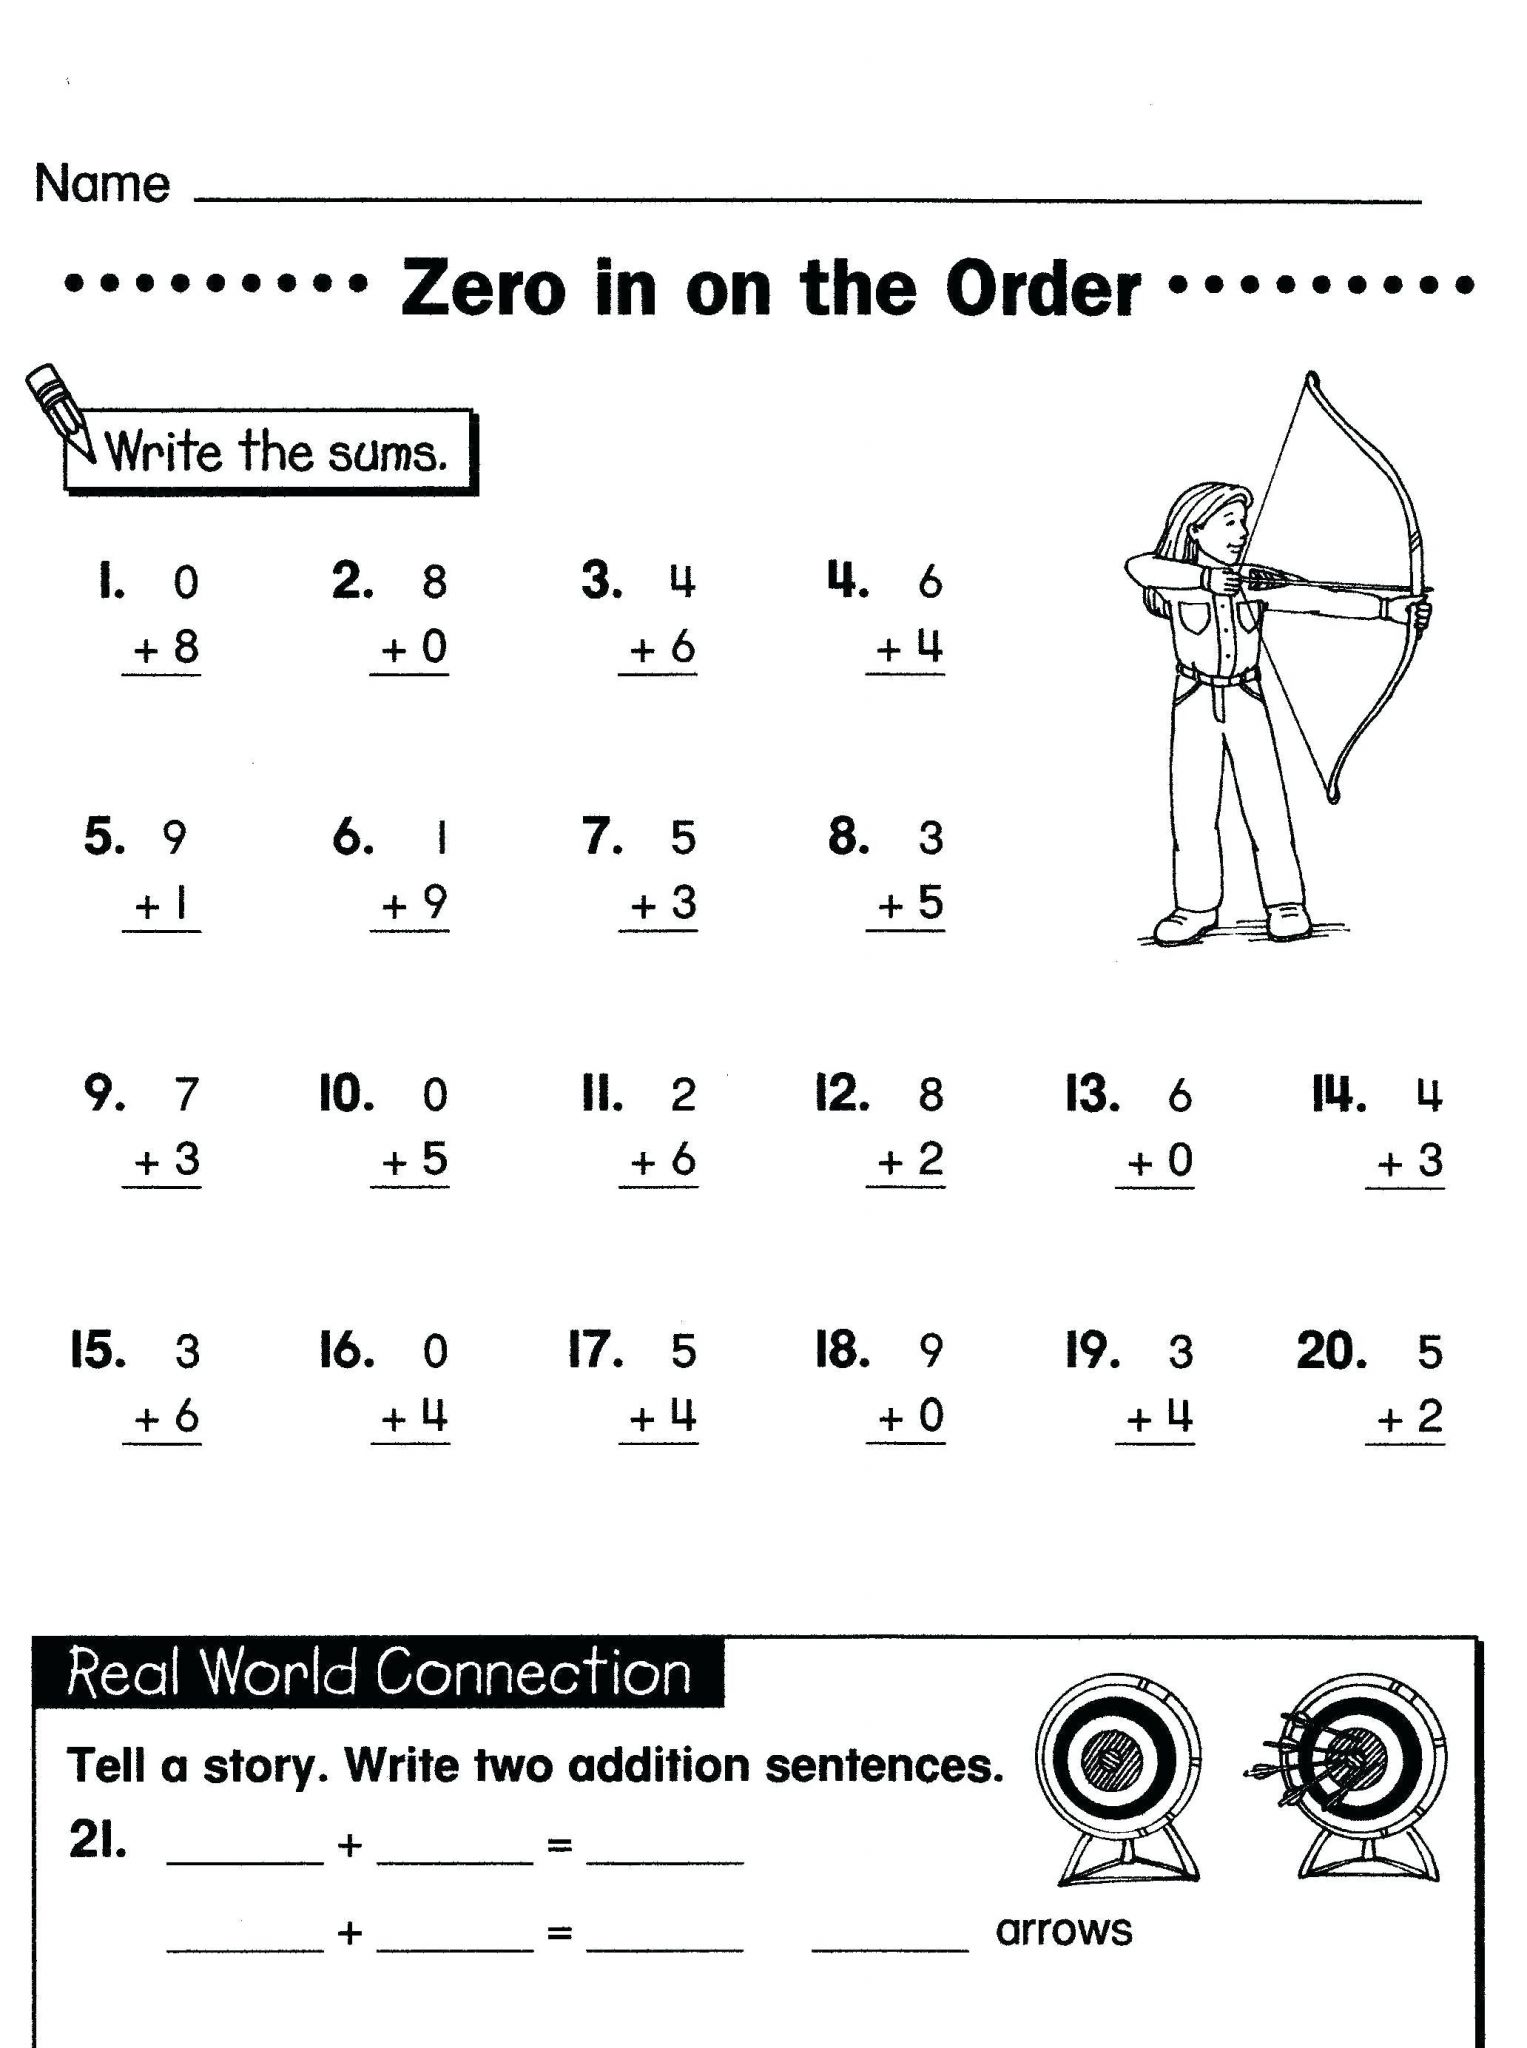 4-free-math-worksheets-third-grade-3-place-value-and-rounding-write-4